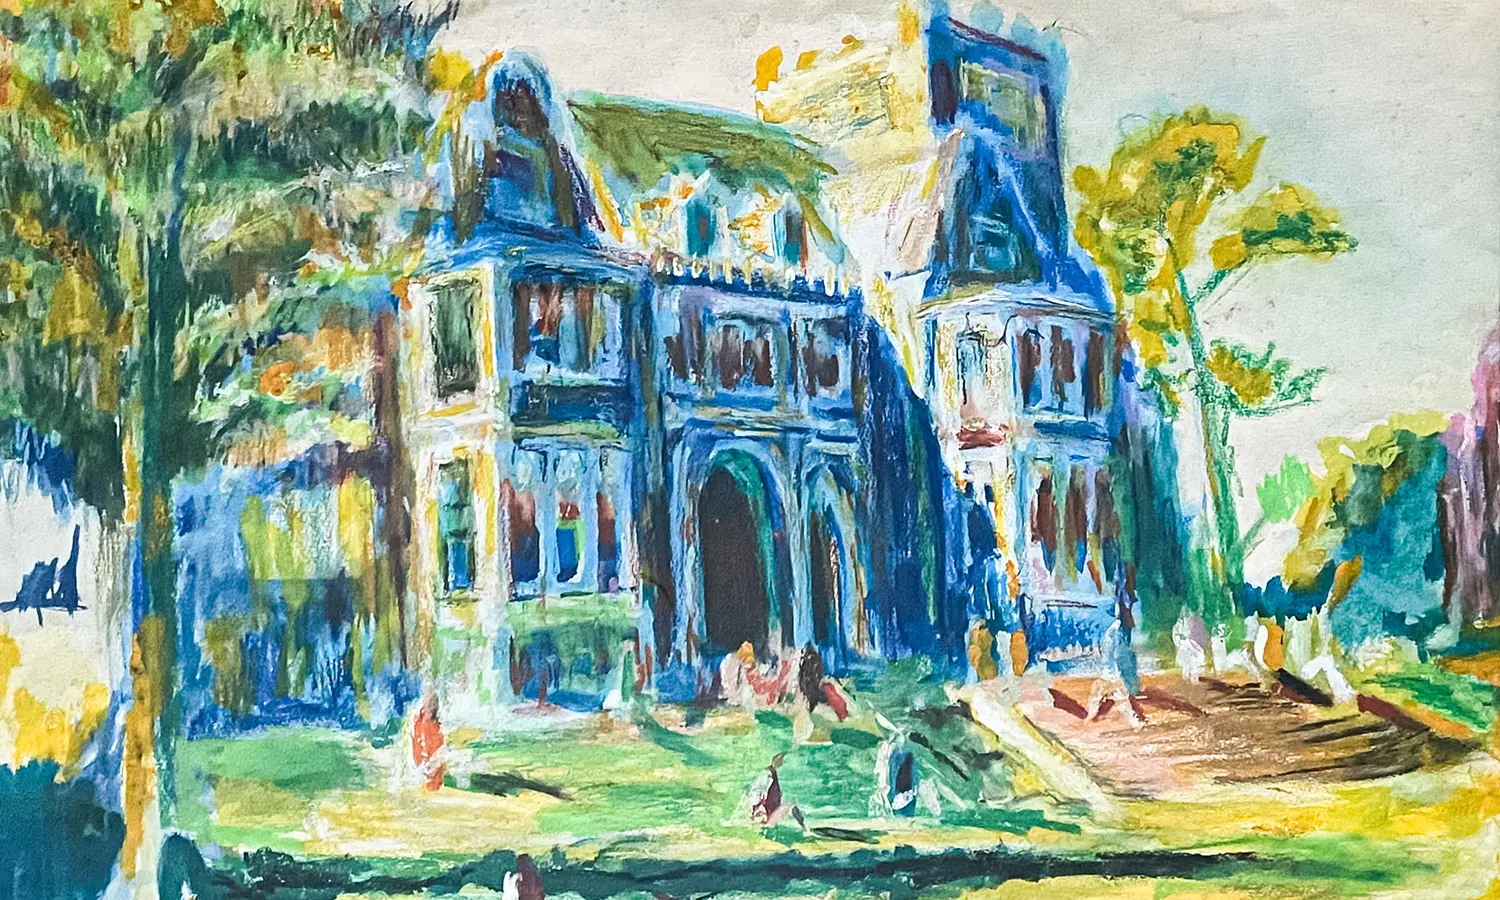 Painting by Michael Rawlins of Coxe Hall, 1980